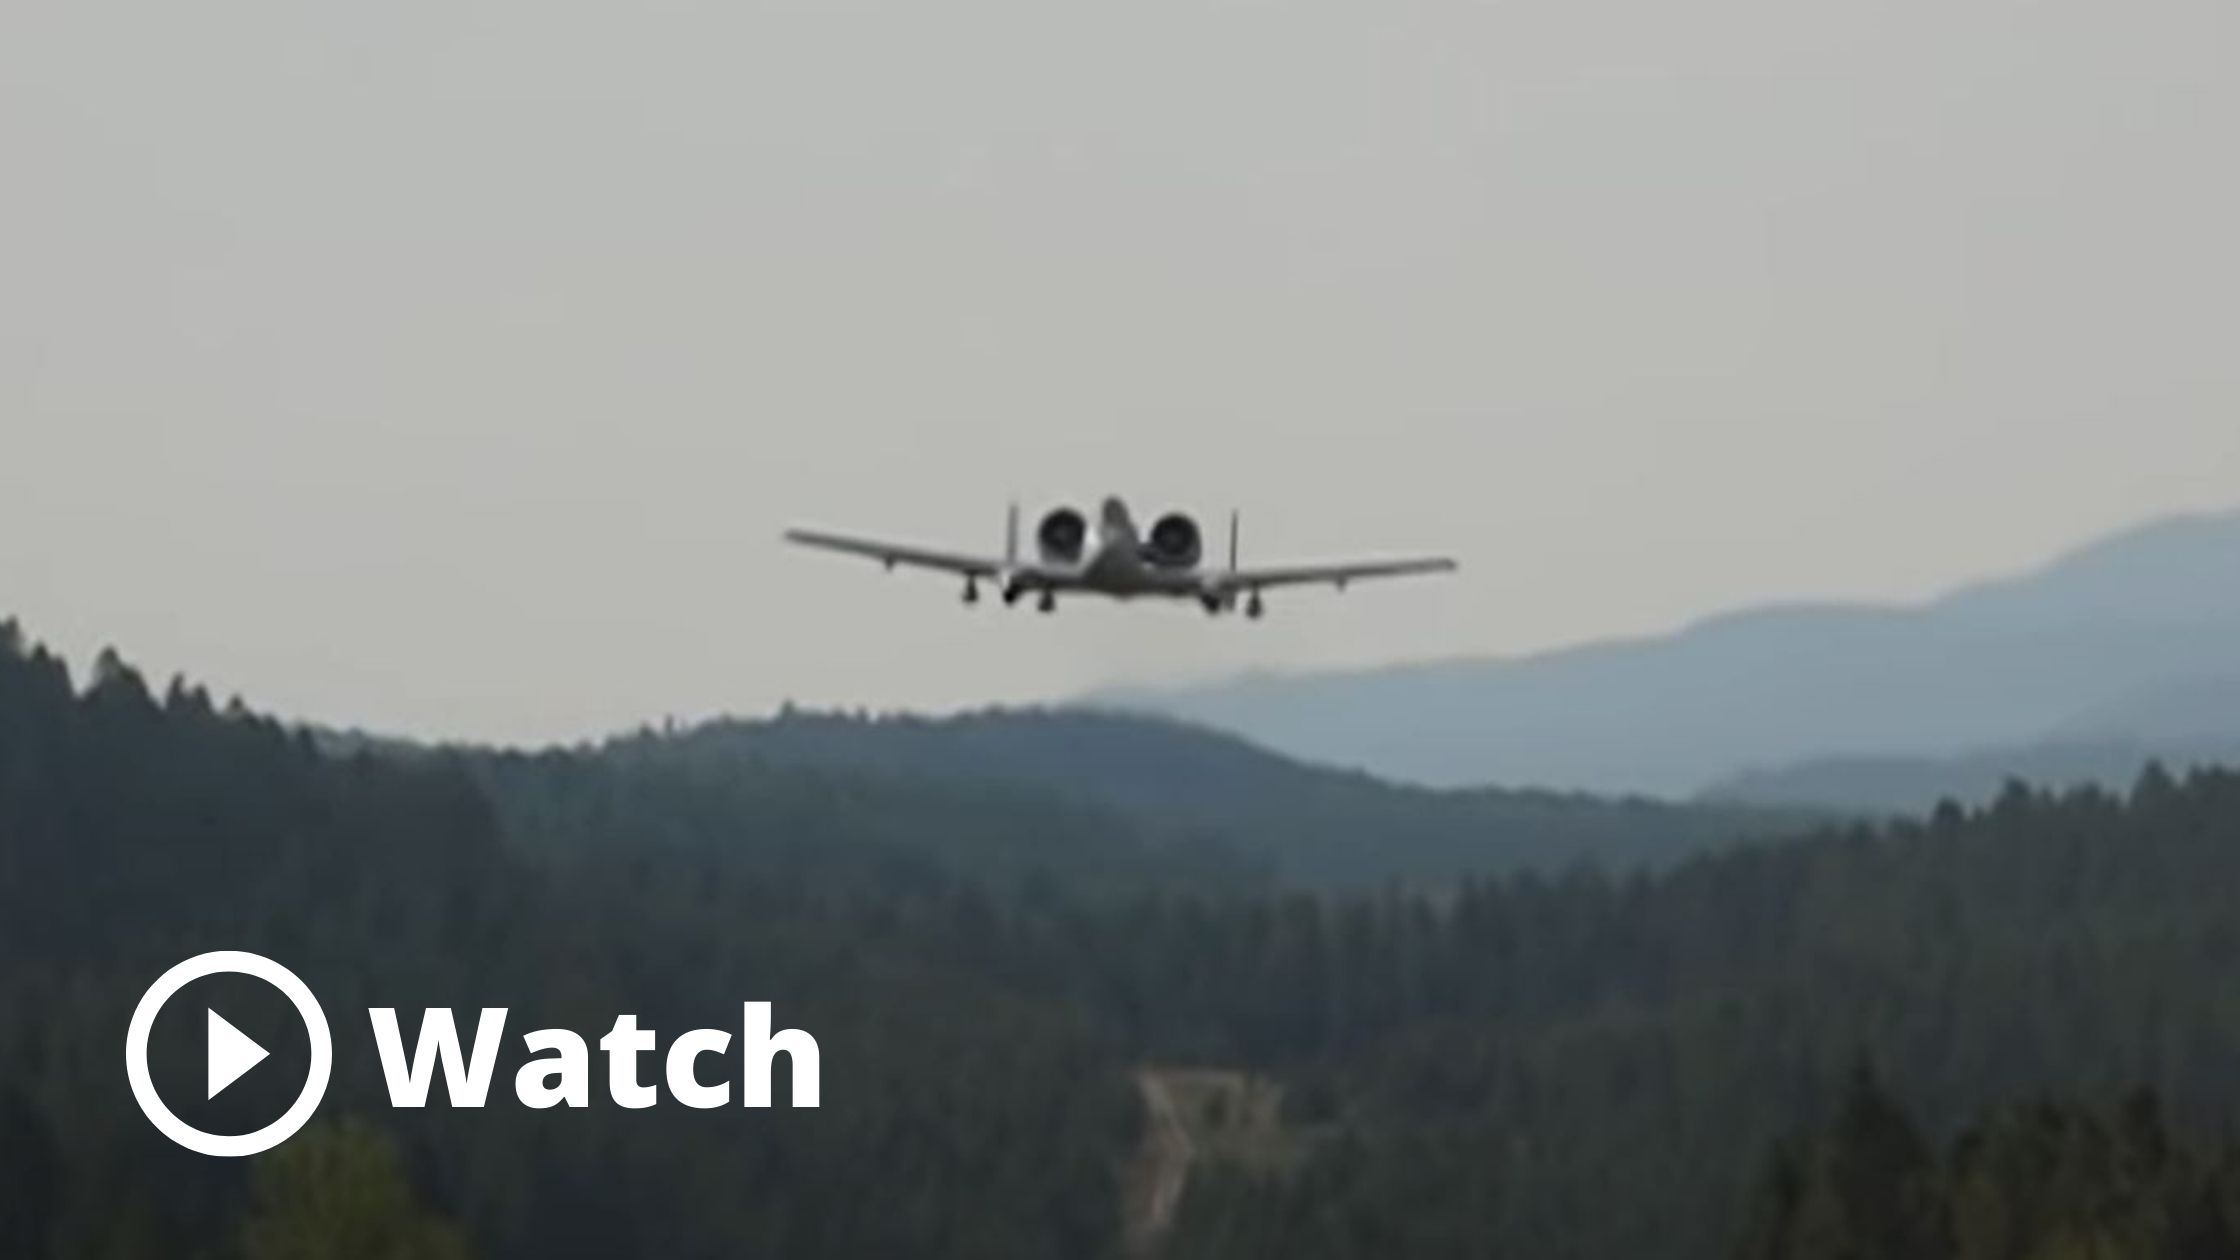 Have You Ever Seen An A-10 Warthog Low Pass This Cool?